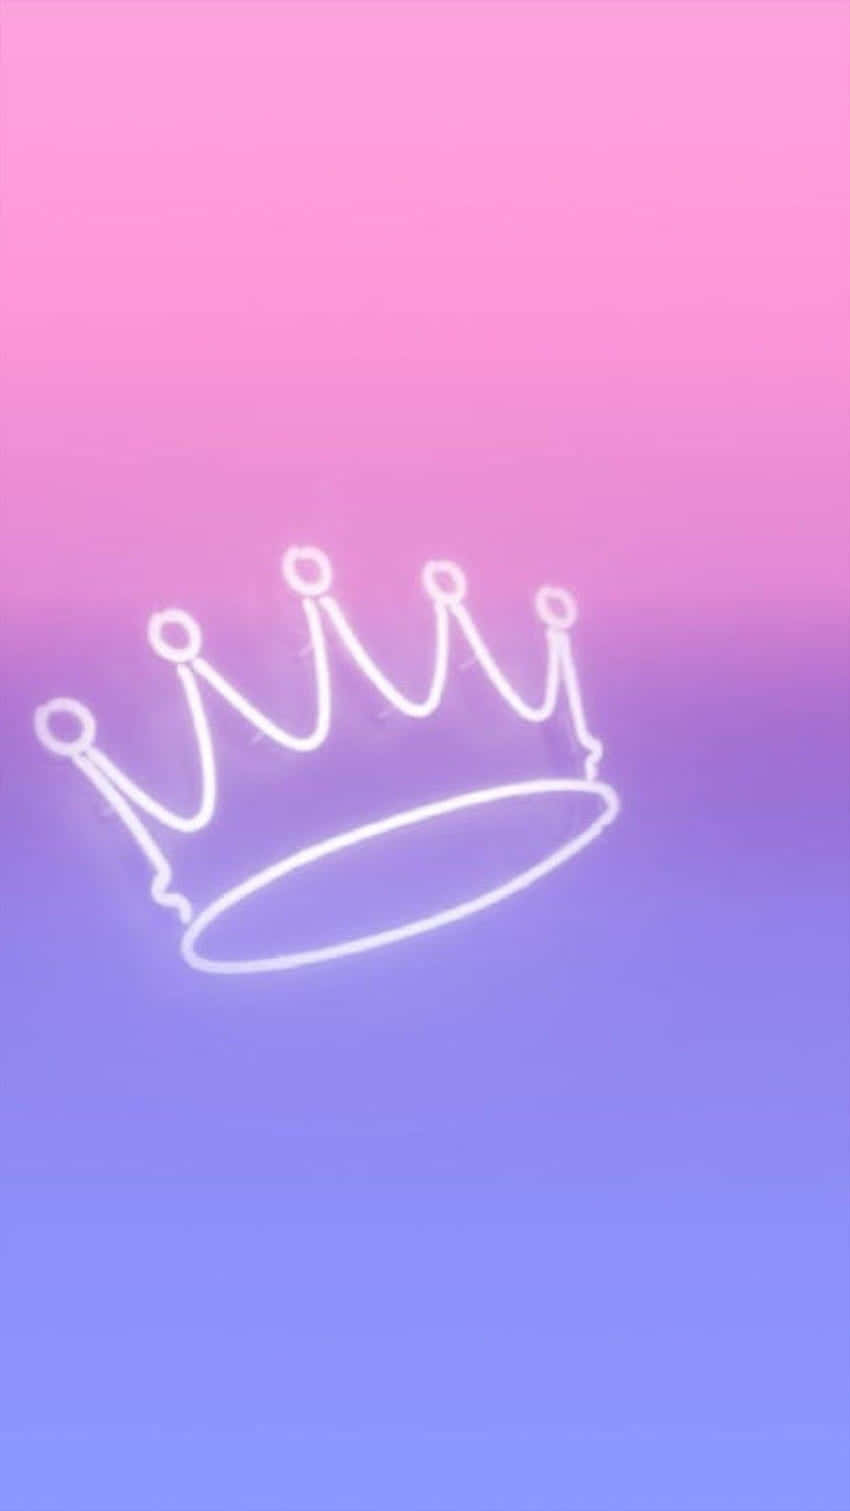 A Crown On A Pink And Purple Background